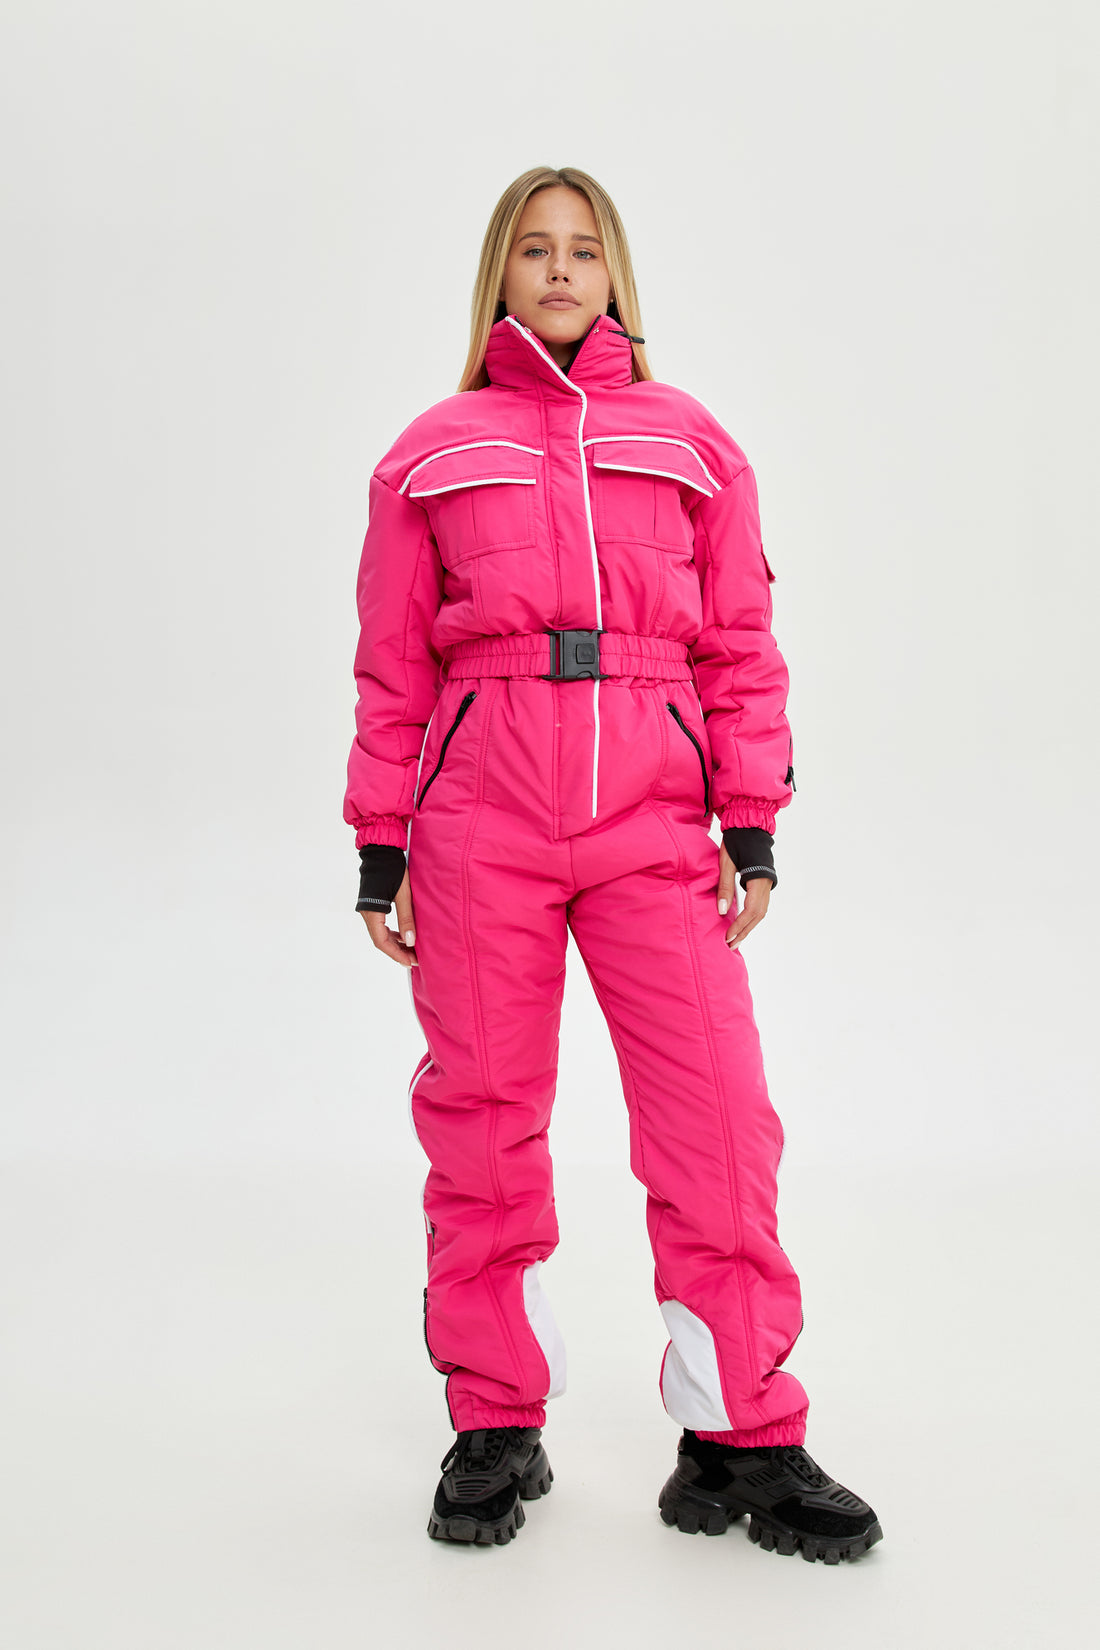 Hot pink ski suit BLANC - PINK with white edging - One piece ski suit for women